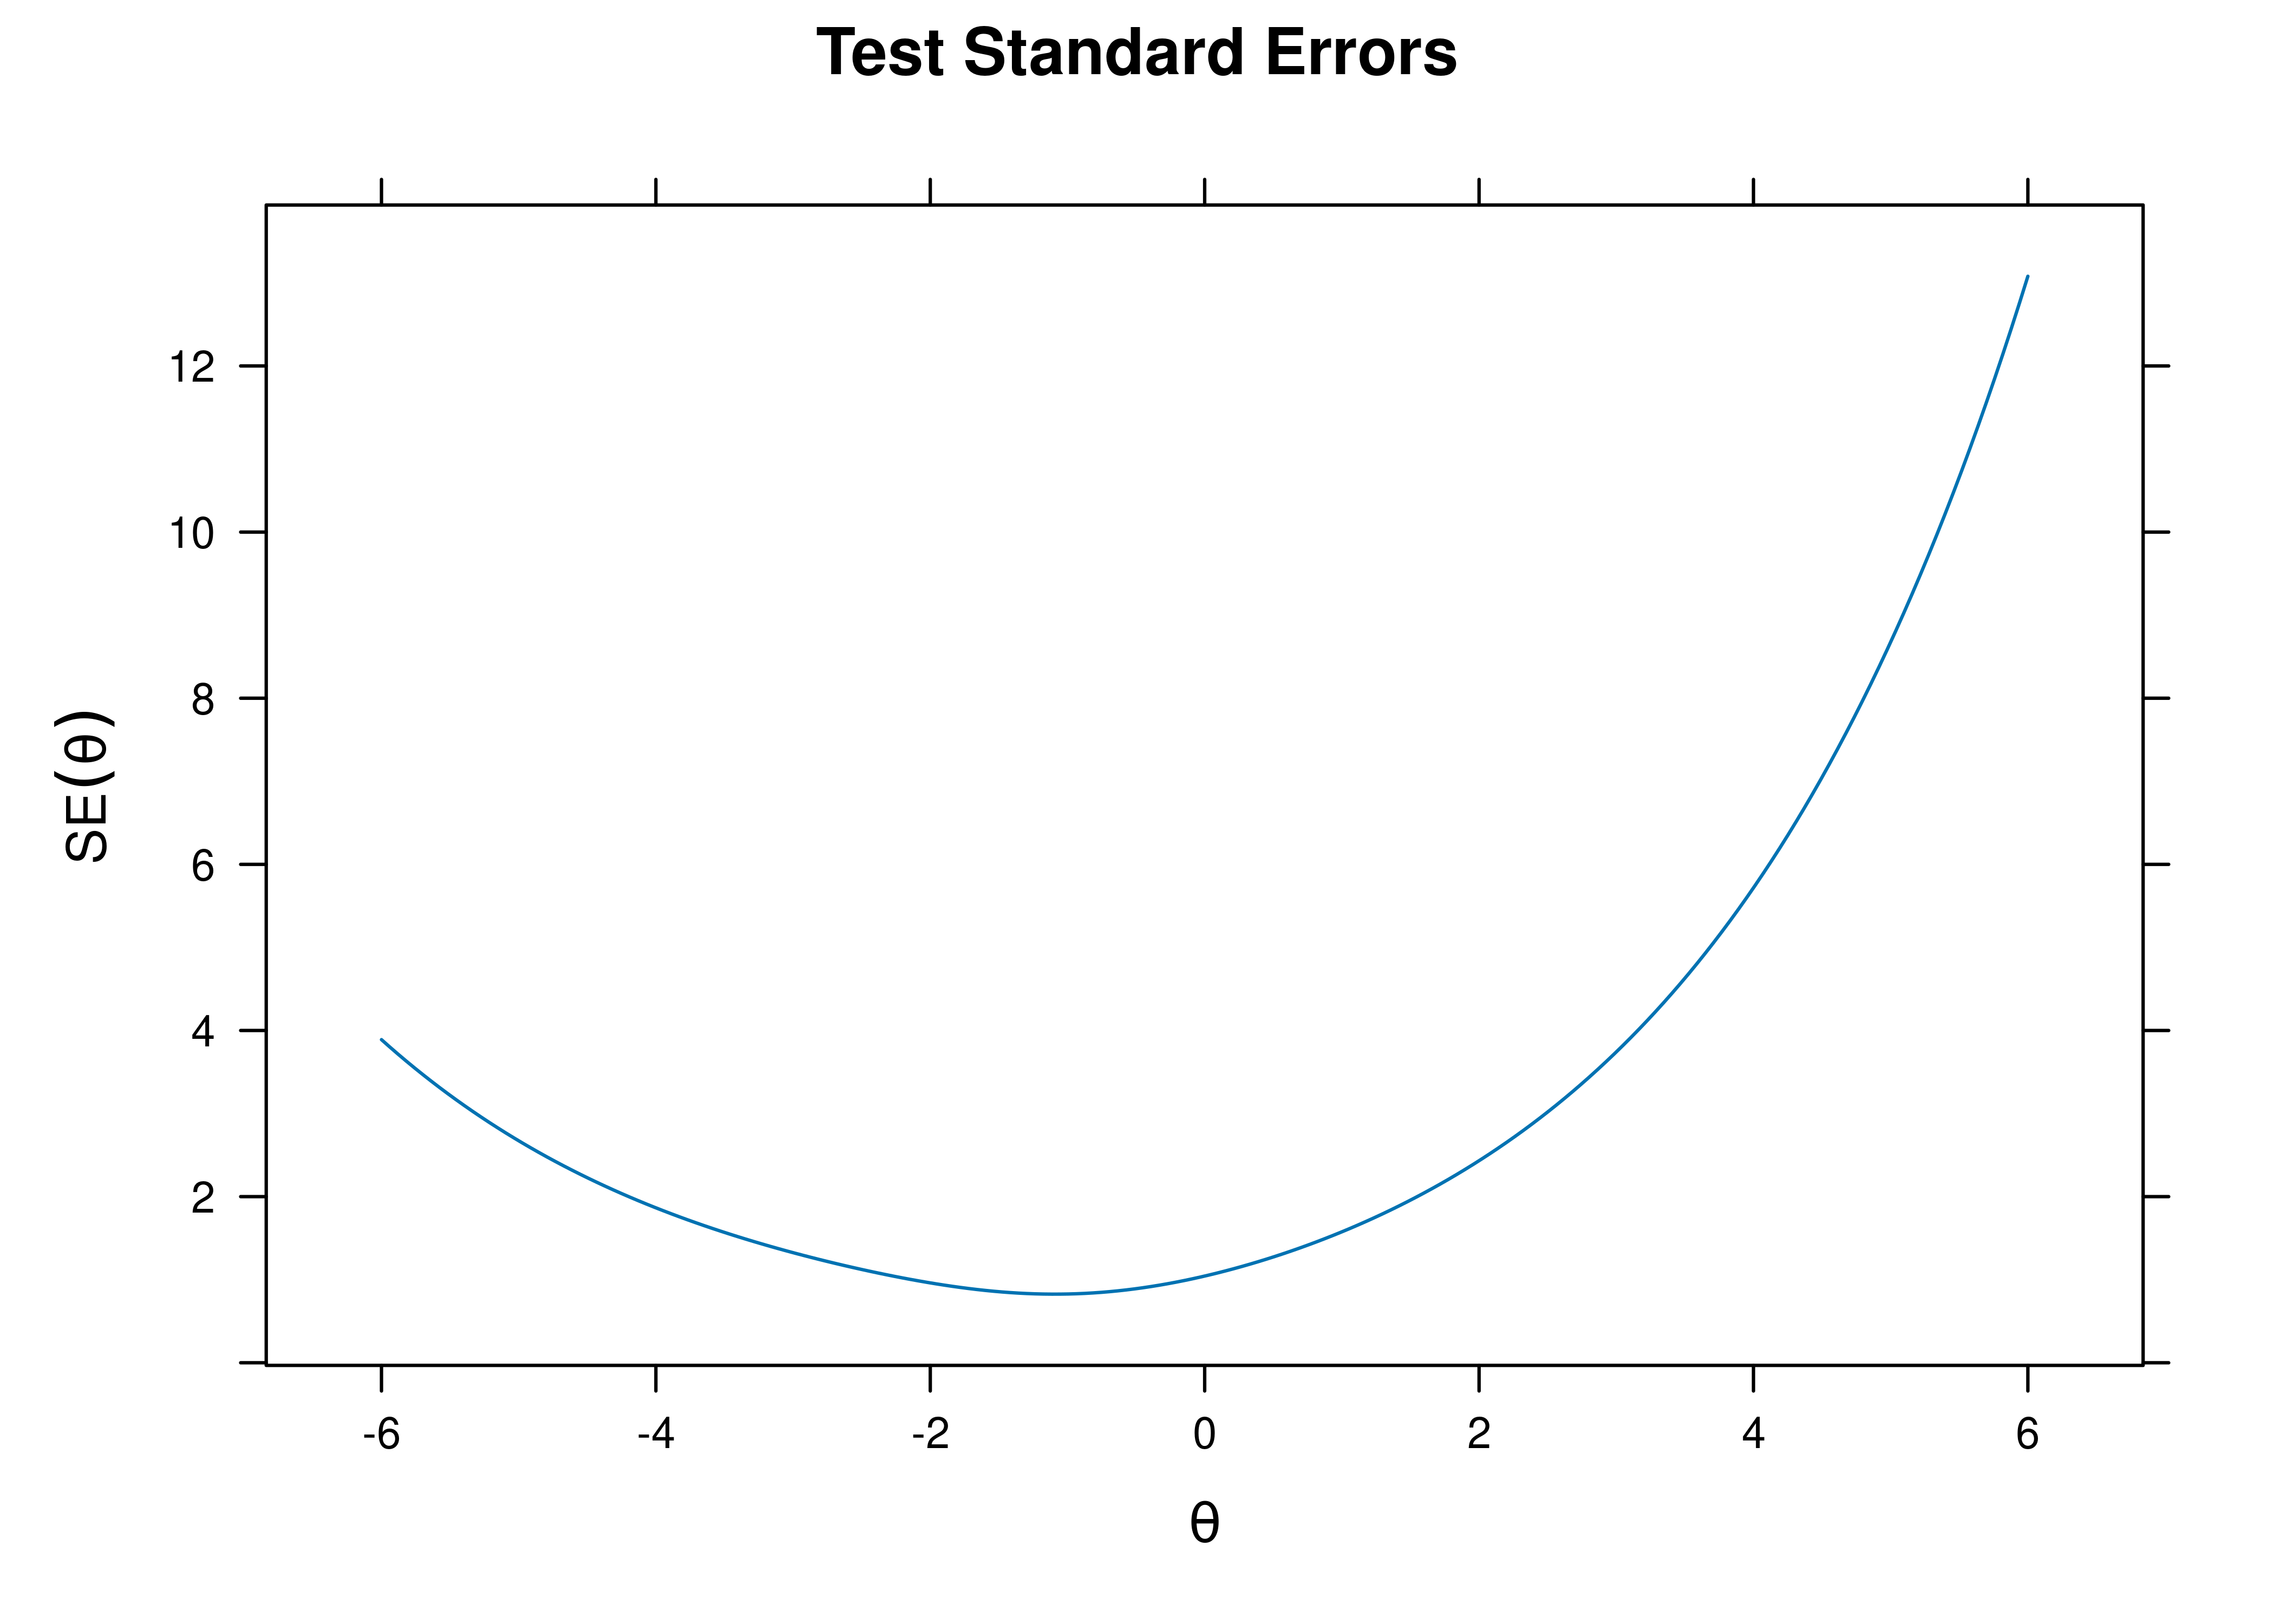 Test Standard Error of Measurement From Two-Parameter Logistic Item Response Theory Model.